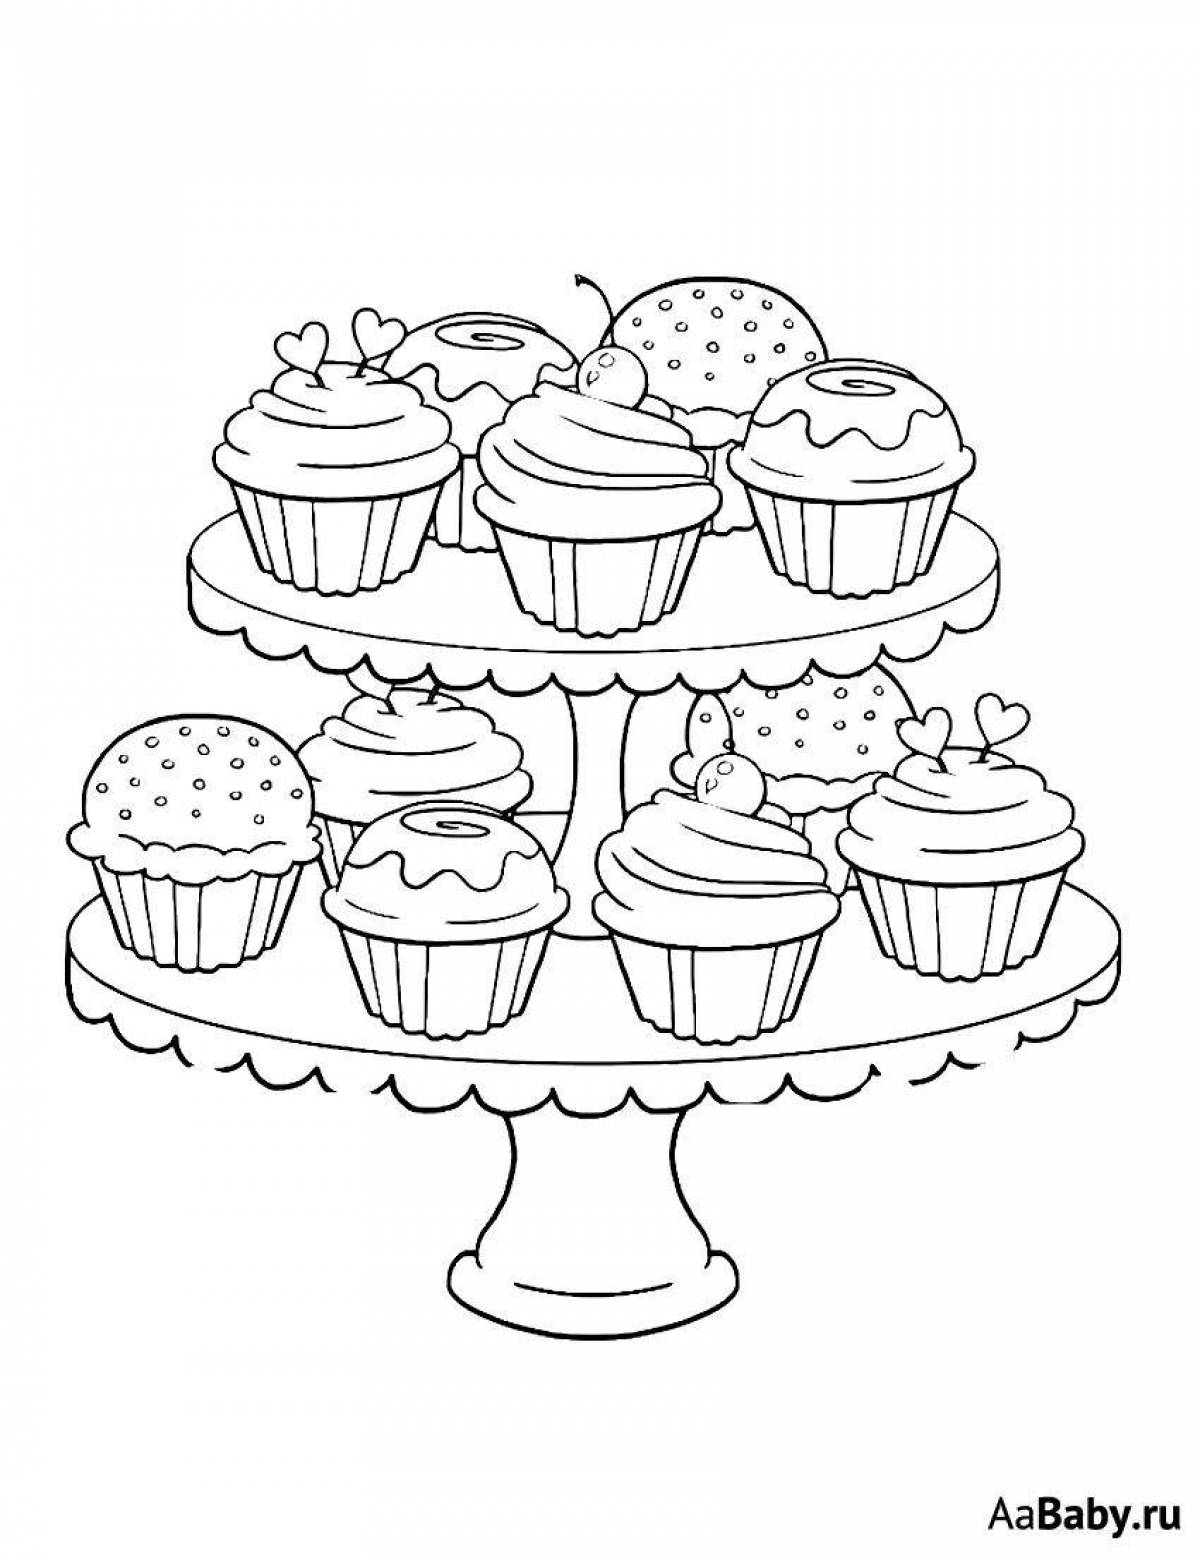 Adorable sweets coloring page